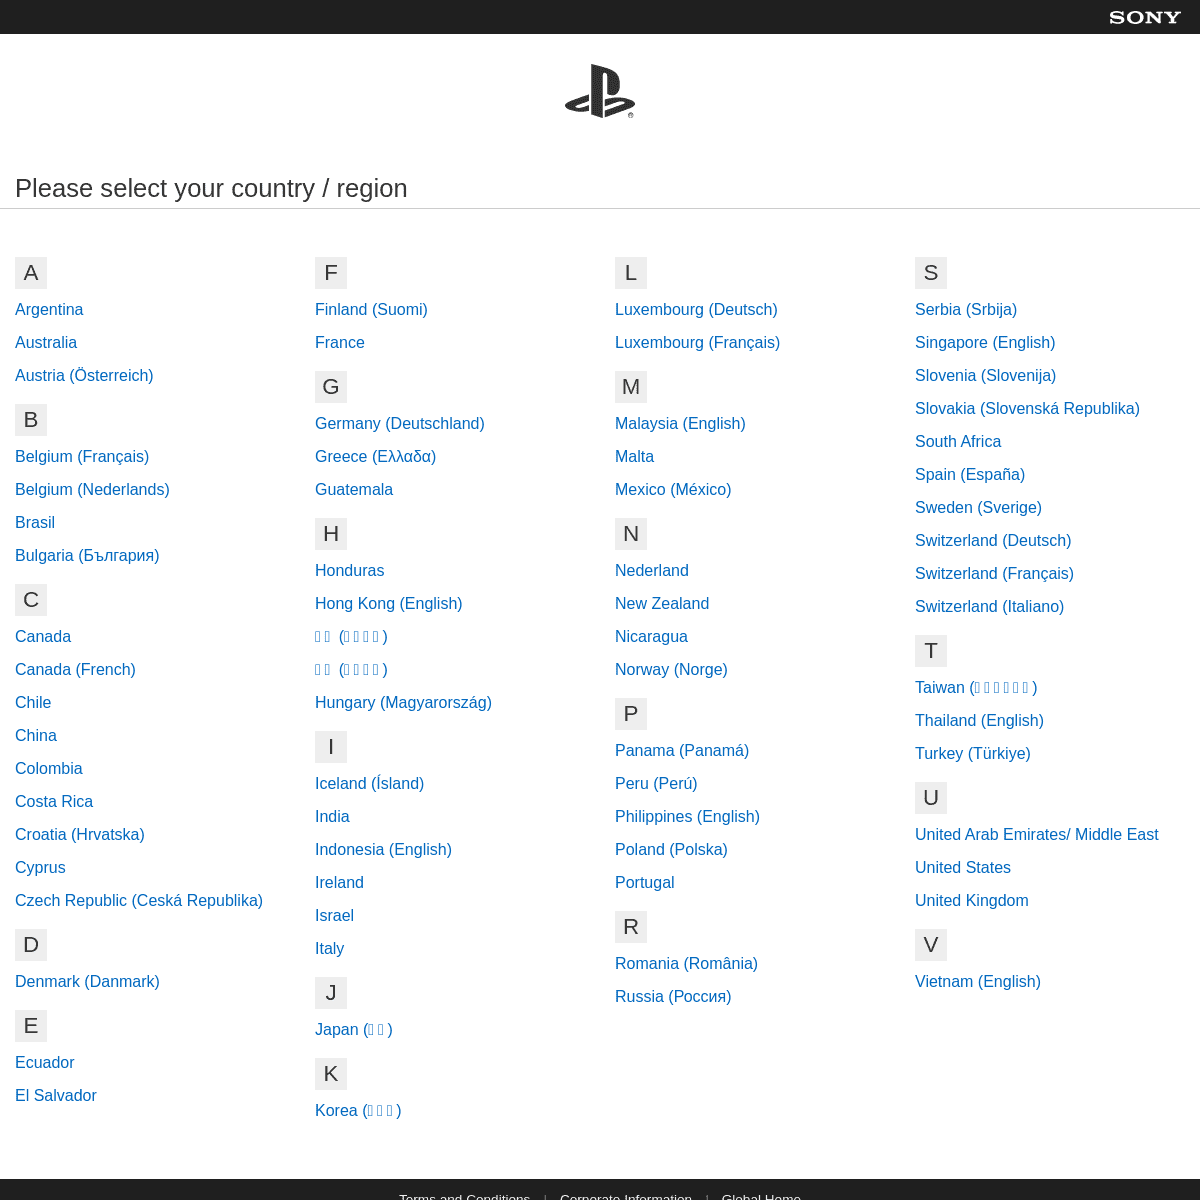 A complete backup of playstation.com